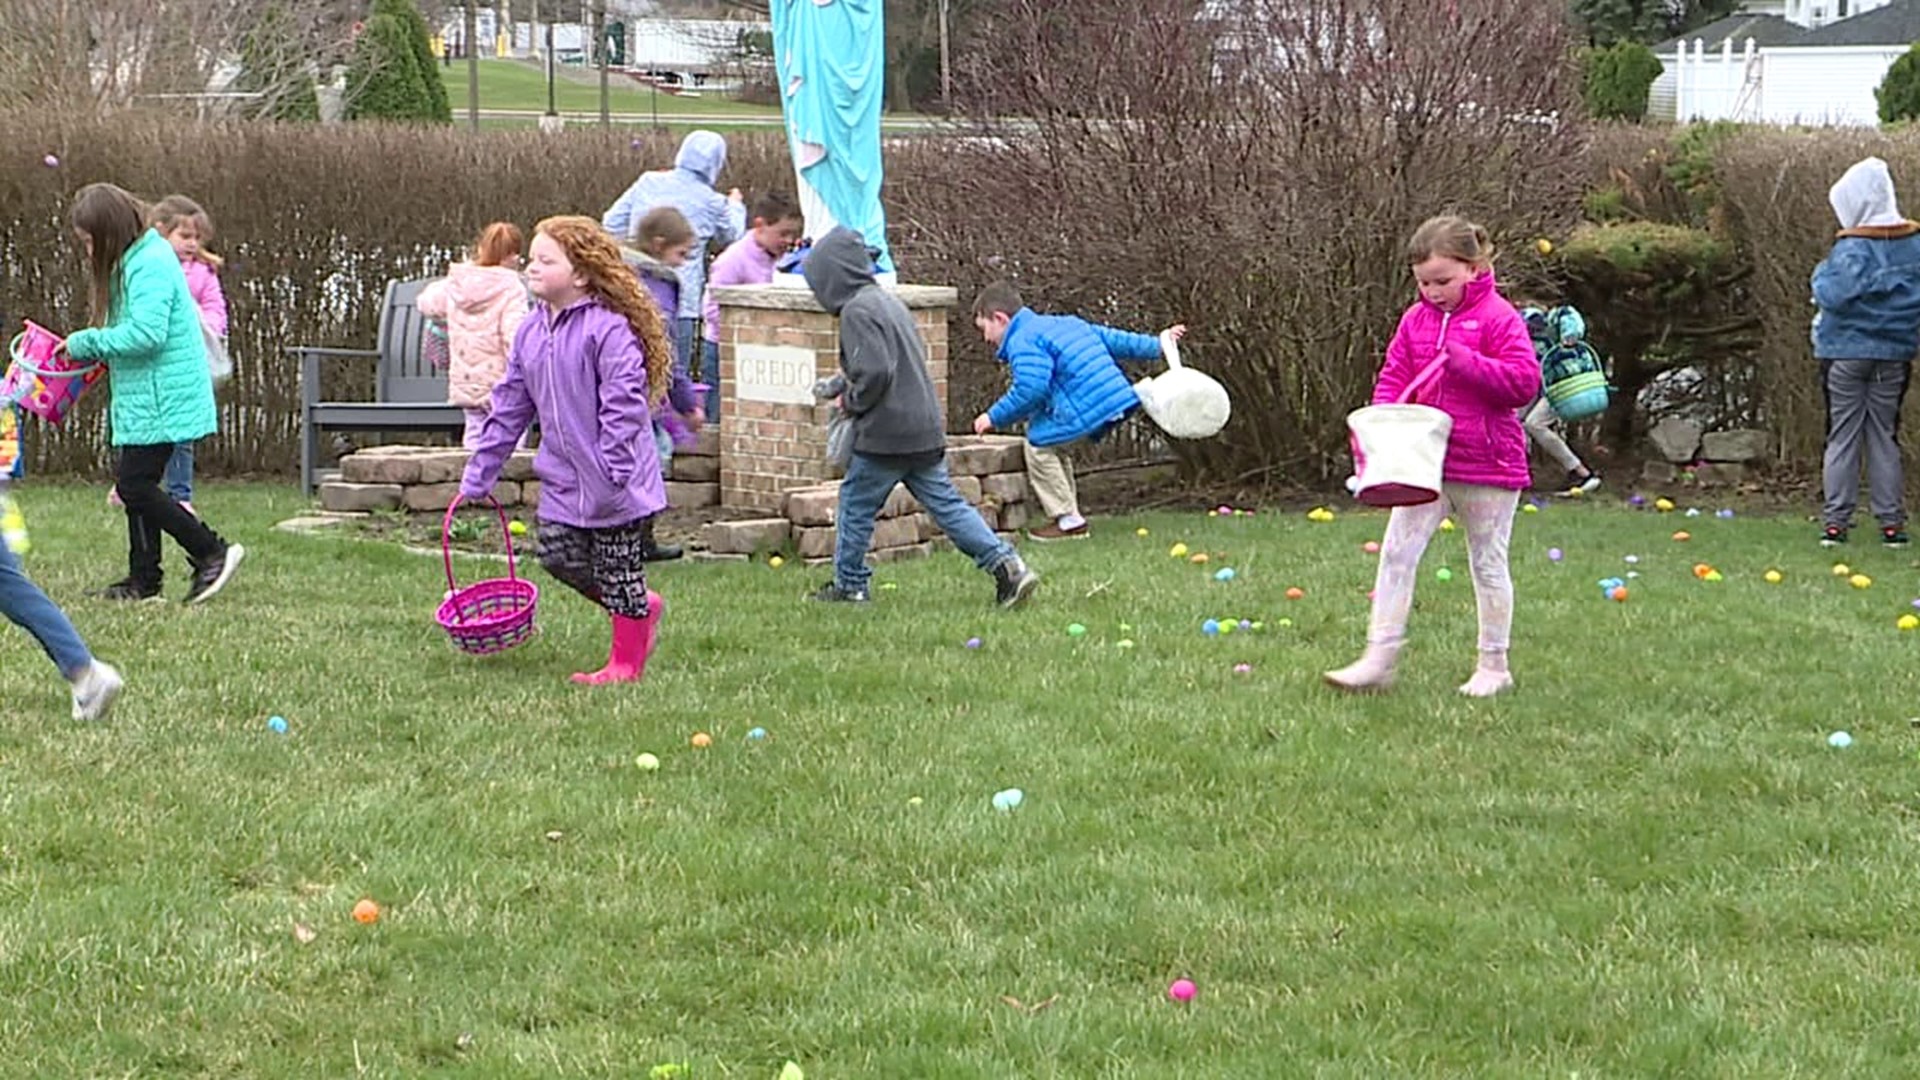 Divine Mercy Parish held the egg hunt at noon in the city.